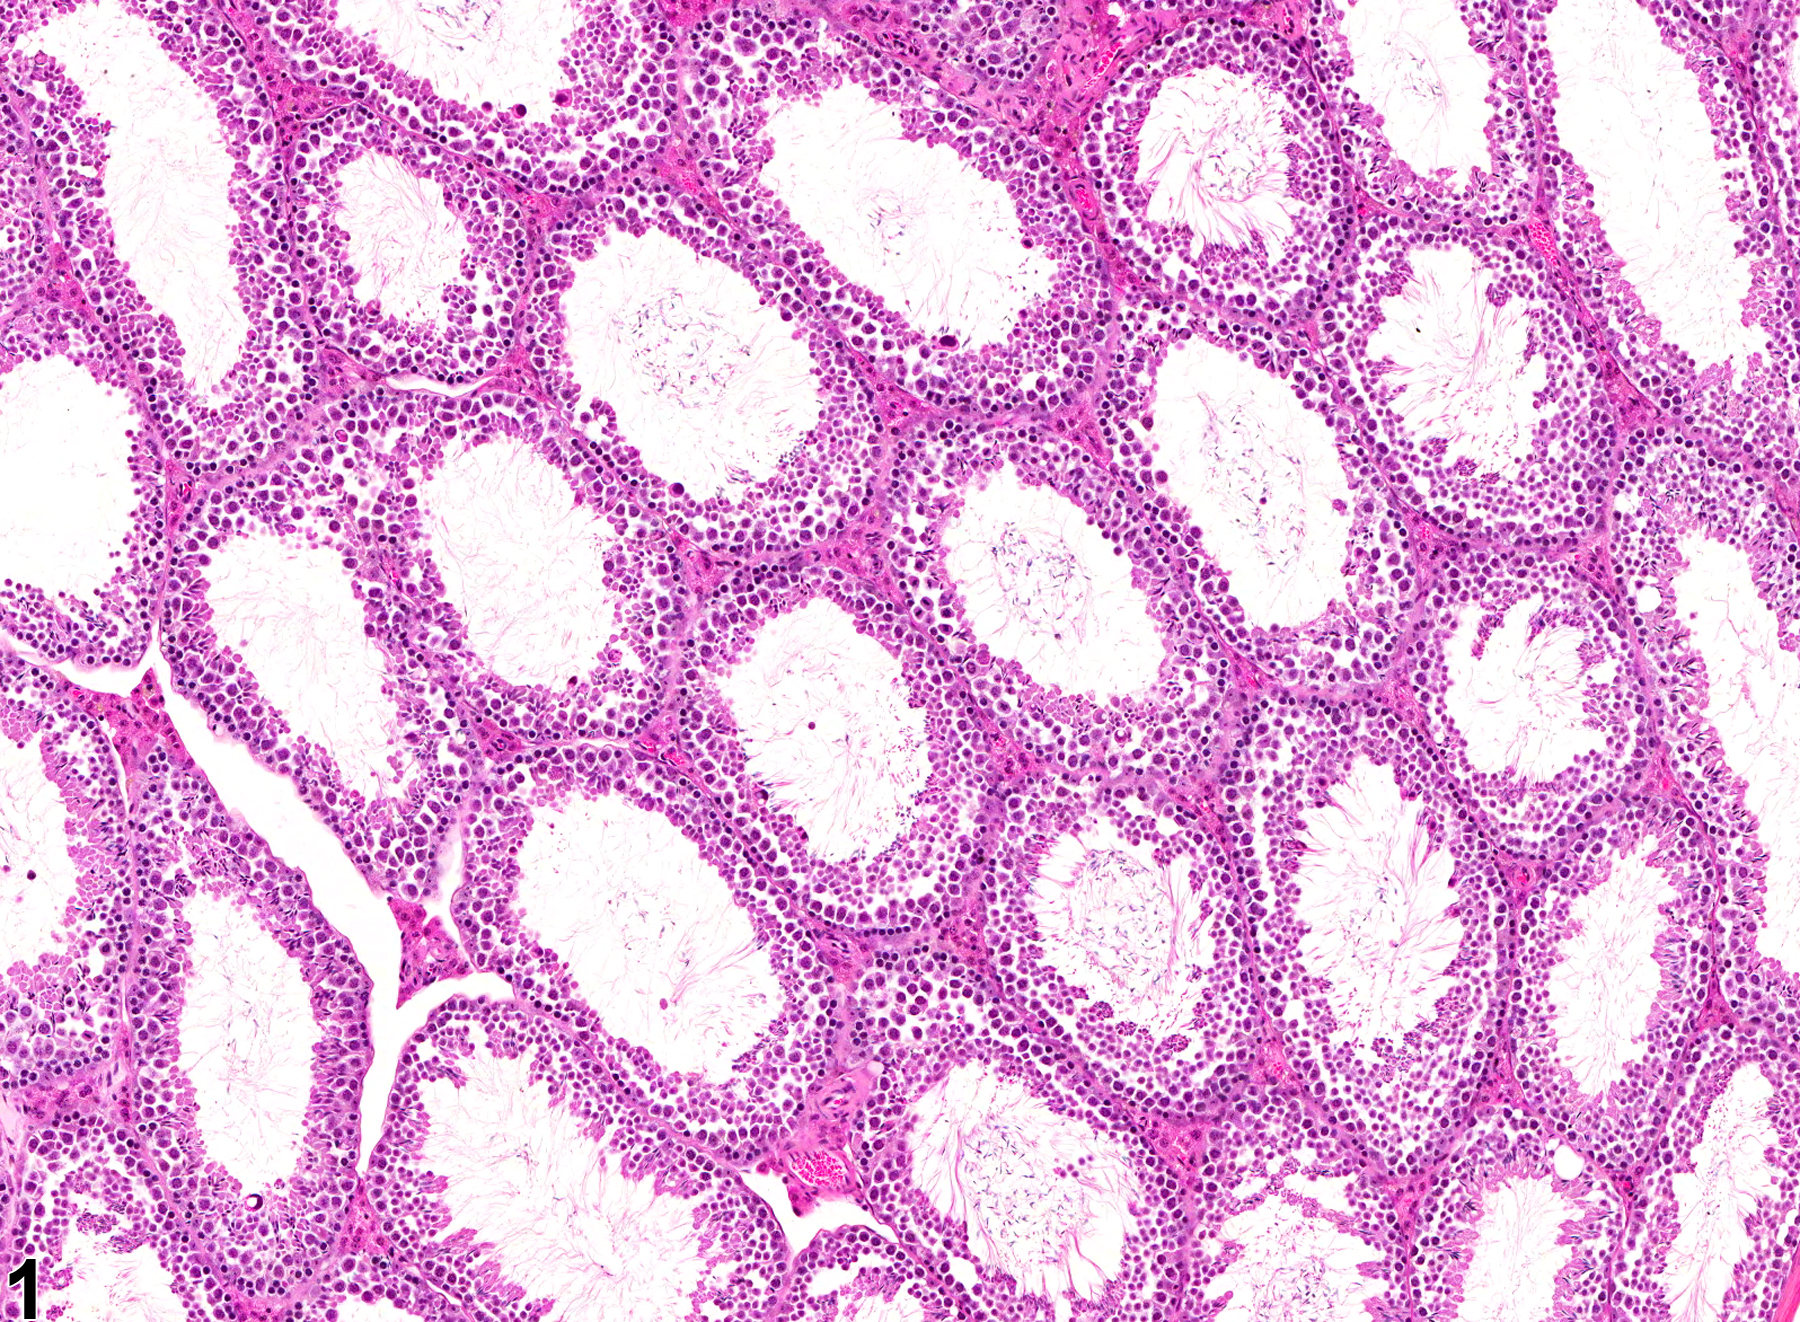 Image of seminiferous tubule dilation in the testis from a male B6C3F1 mouse in a chronic study